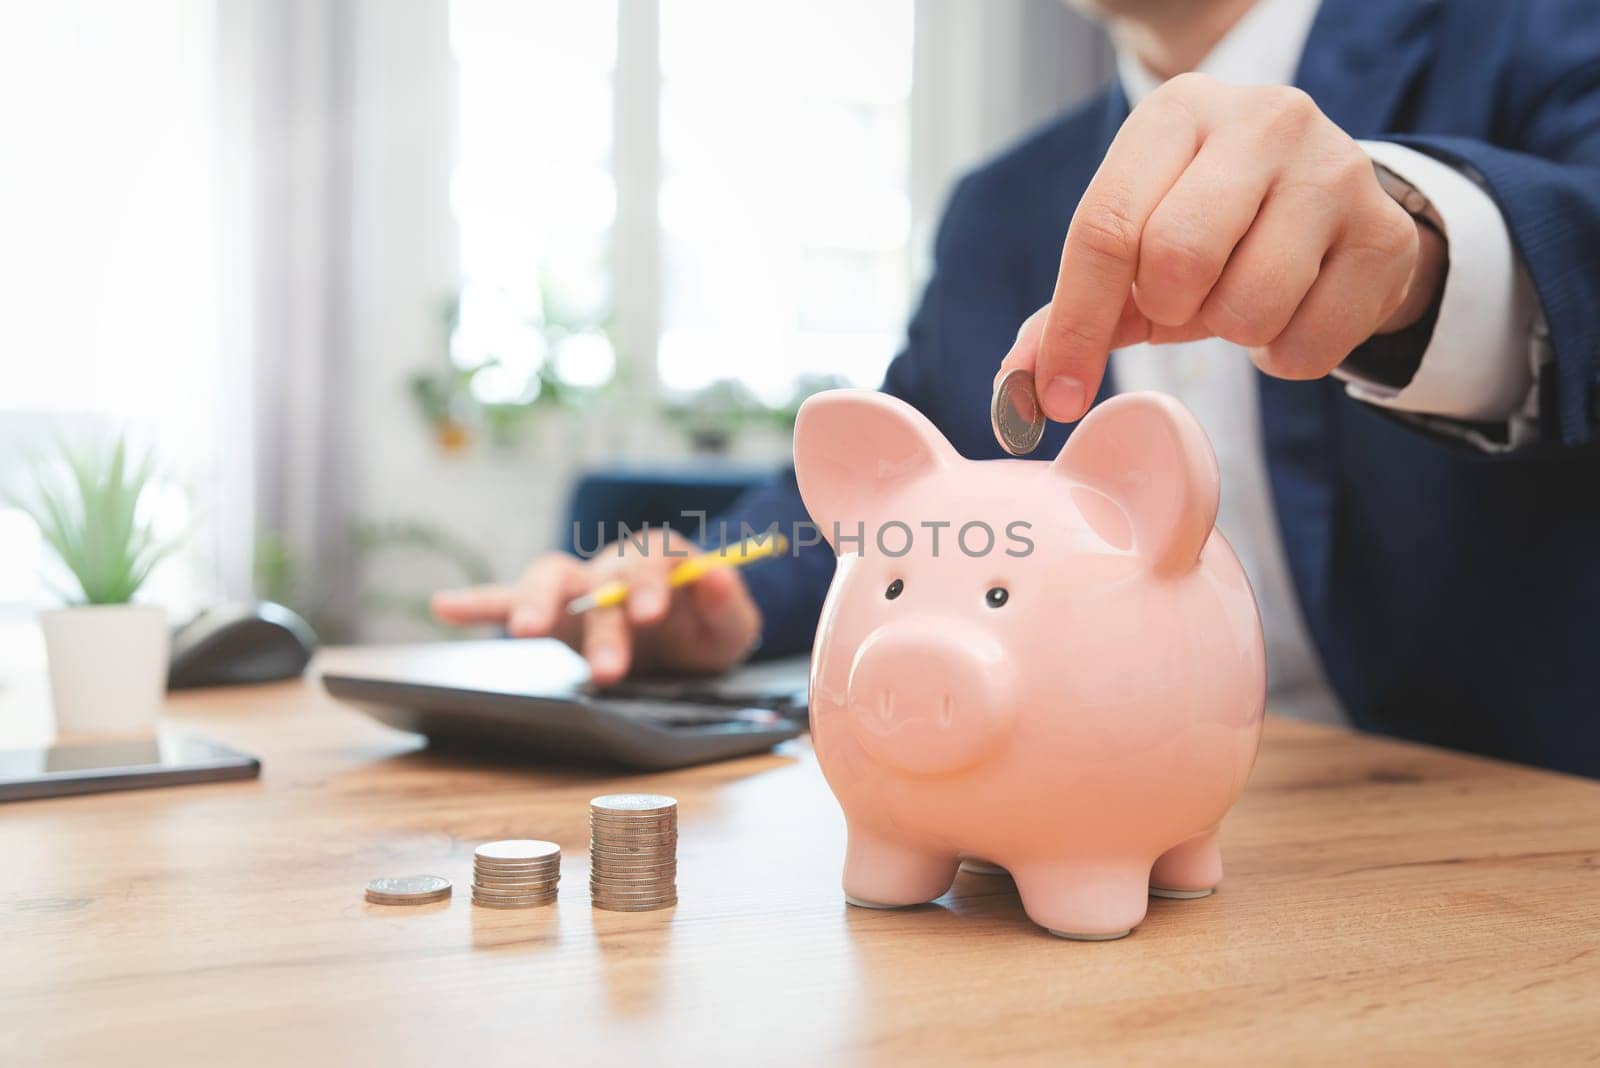 Putting a coin in a piggy bank. Savings, finances, economy and home budget